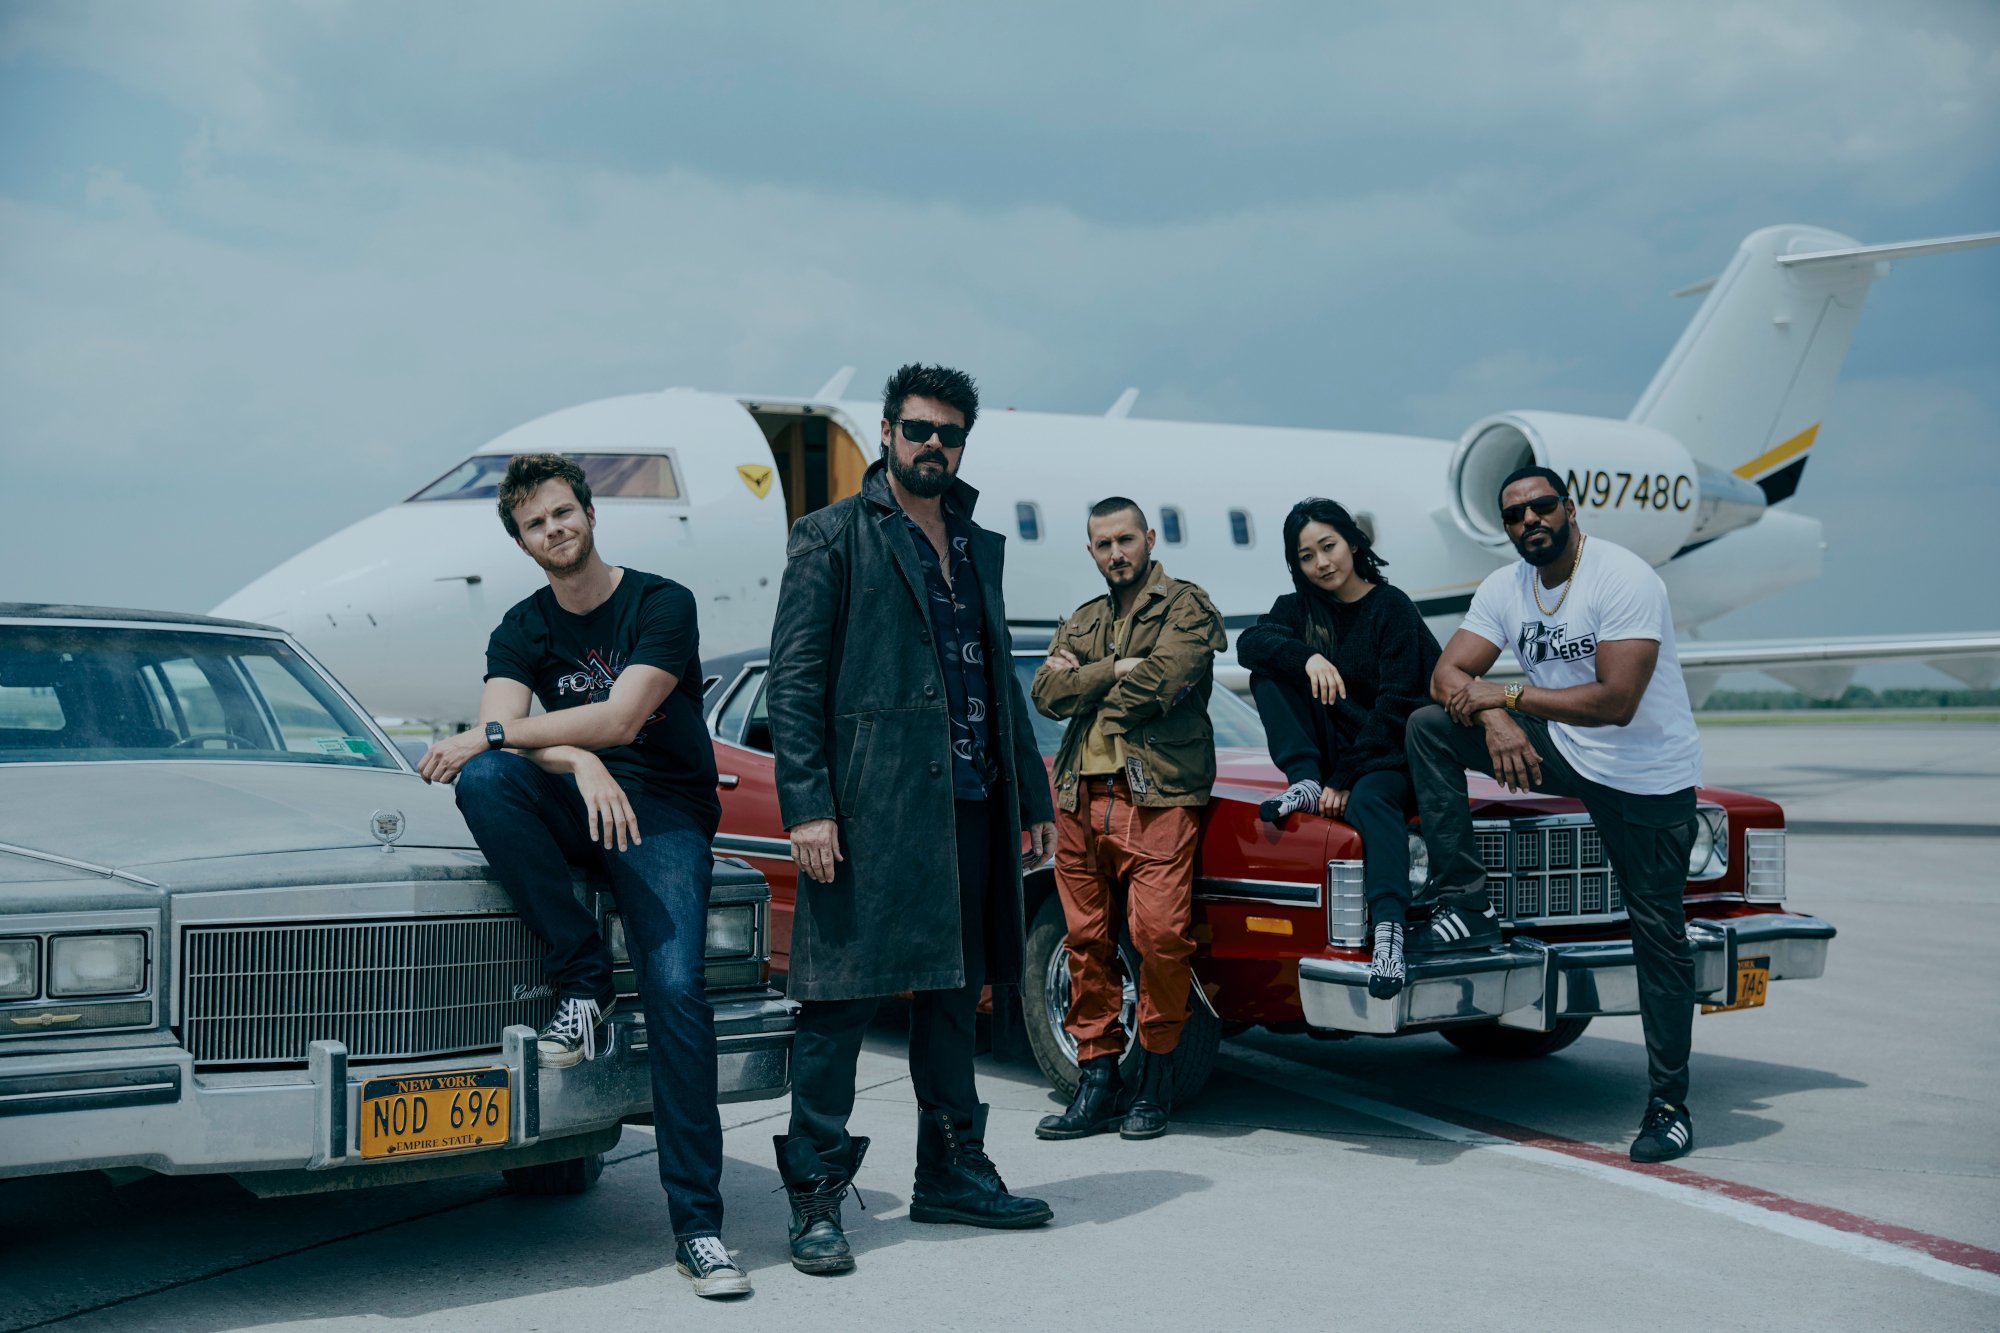 Jack Quaid (Hughie Campbell), Karl Urban (Billy Butcher), Tomer Capone (Frenchie), Karen Fukuhara (Kimiko), Laz Alonso (Mother's Milk) standing in front of an airplane in an image for 'The Boys' Season 3.